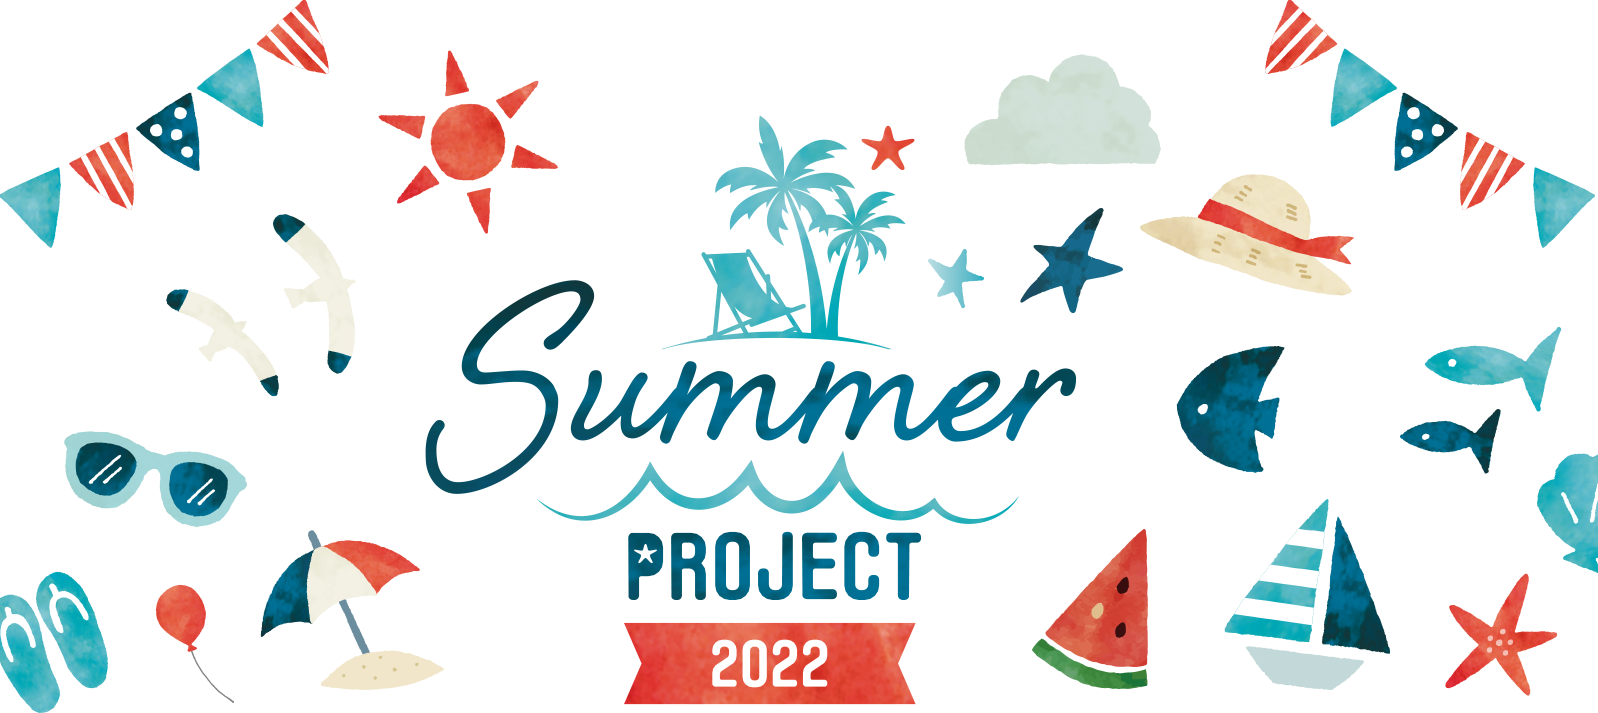 SUMMER PROJECT 2022